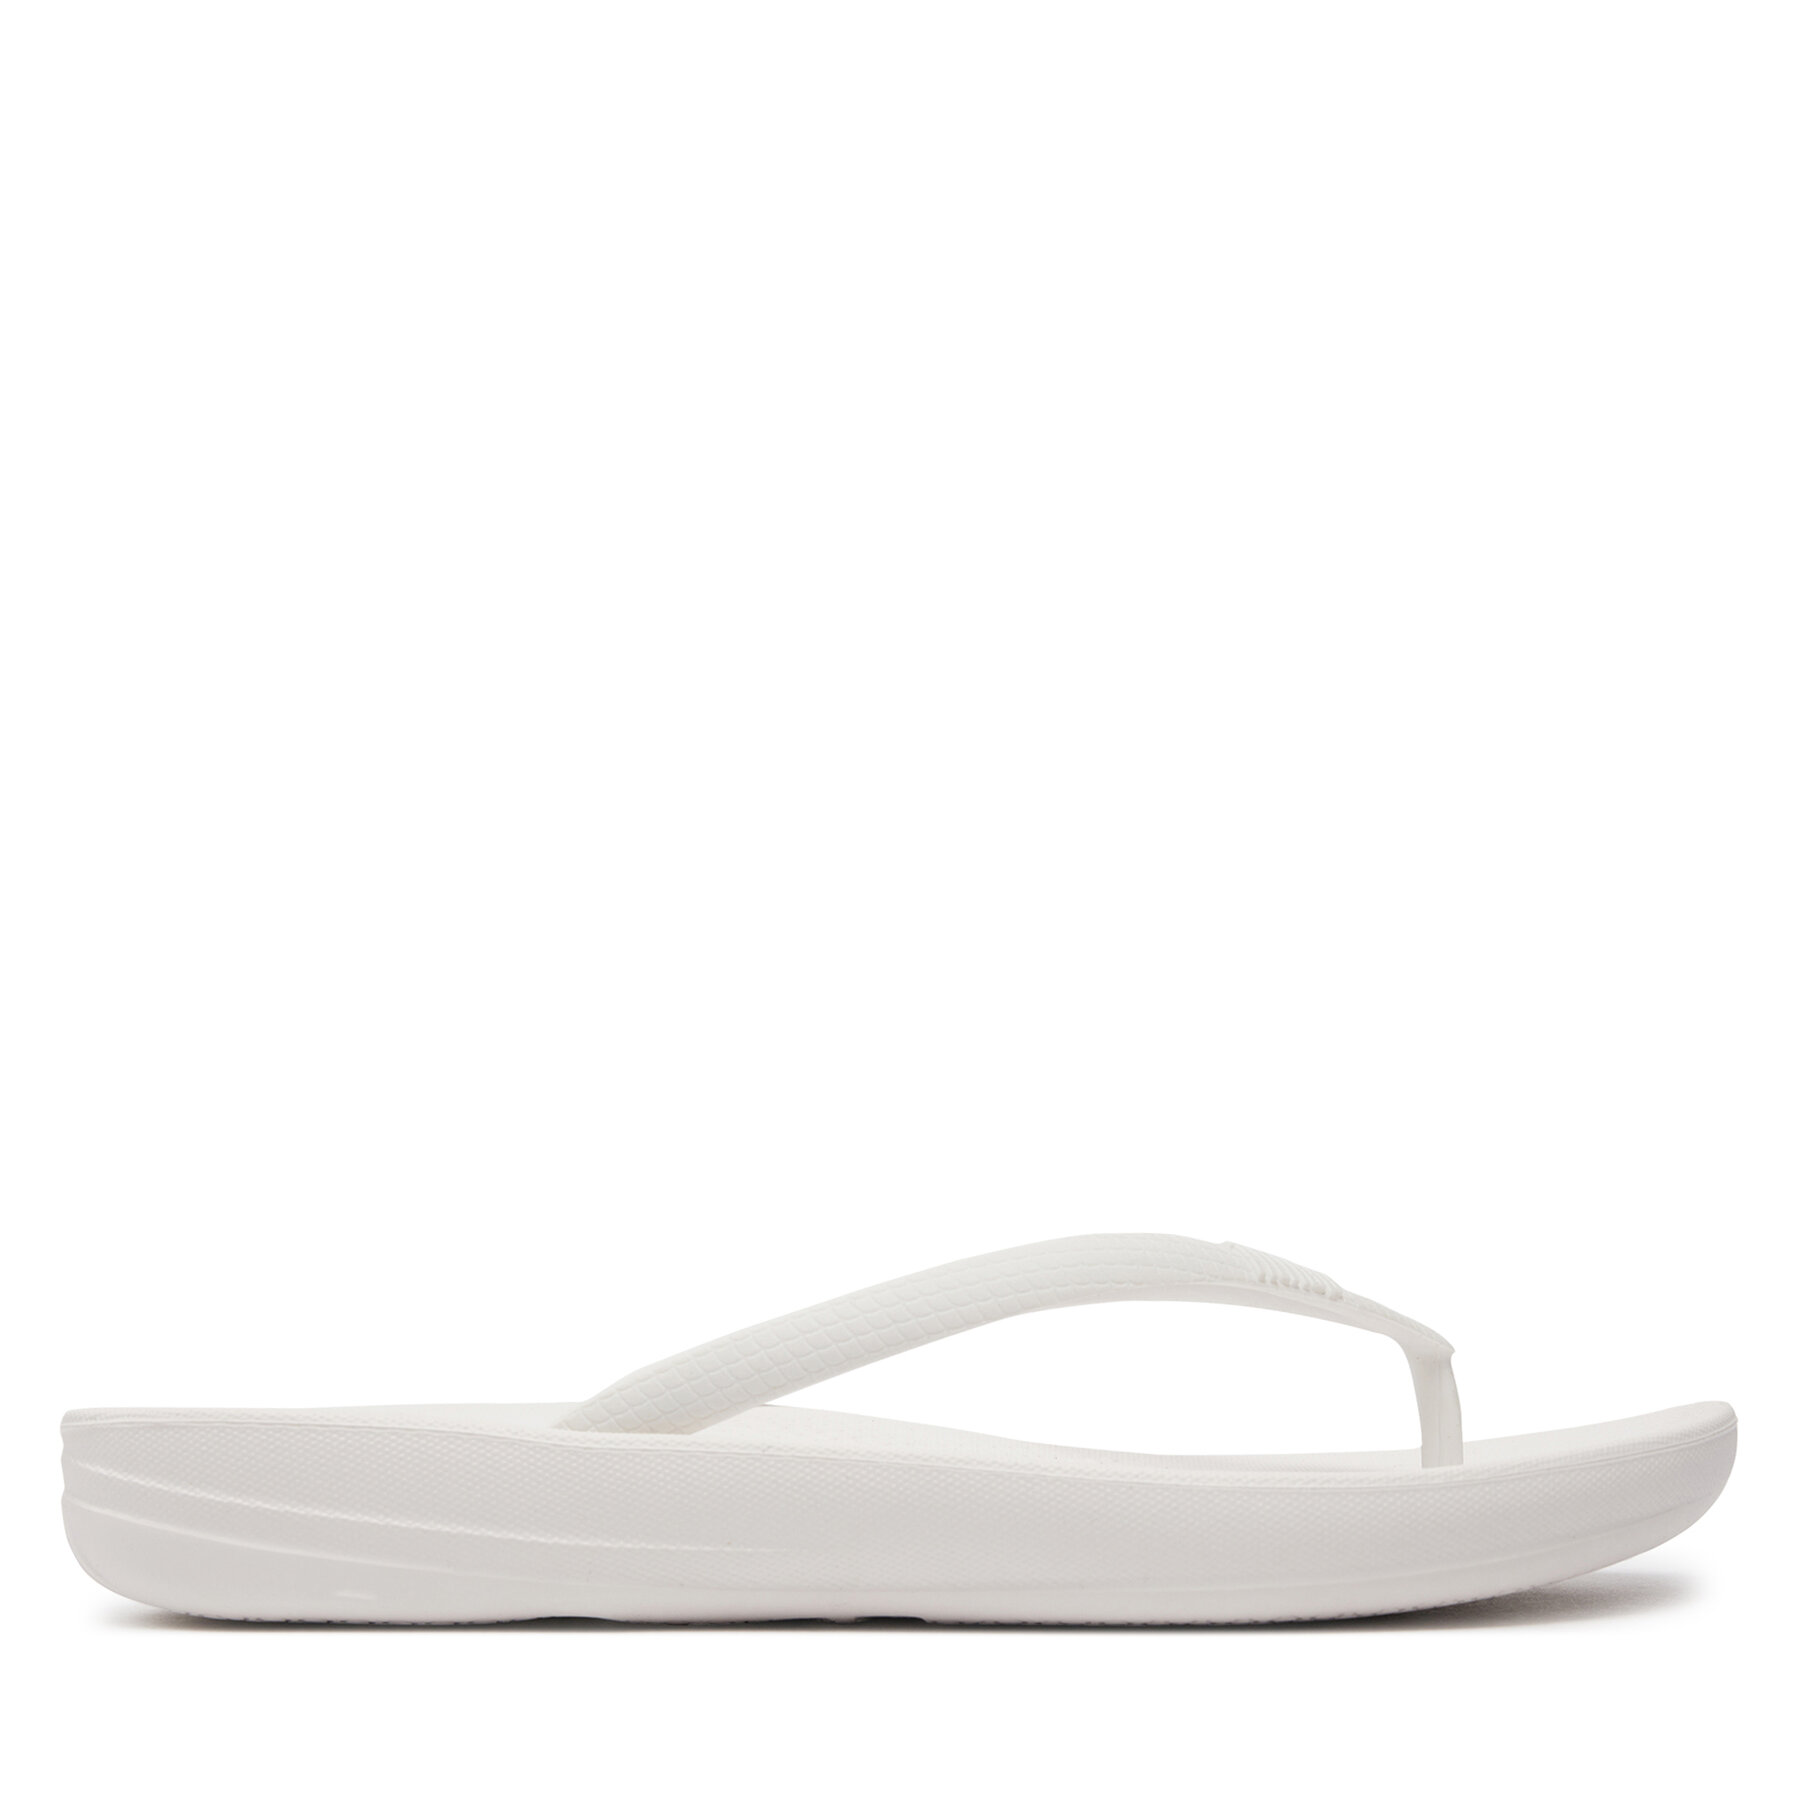 Zehentrenner FitFlop Iqushion E54 White 194 von FitFlop